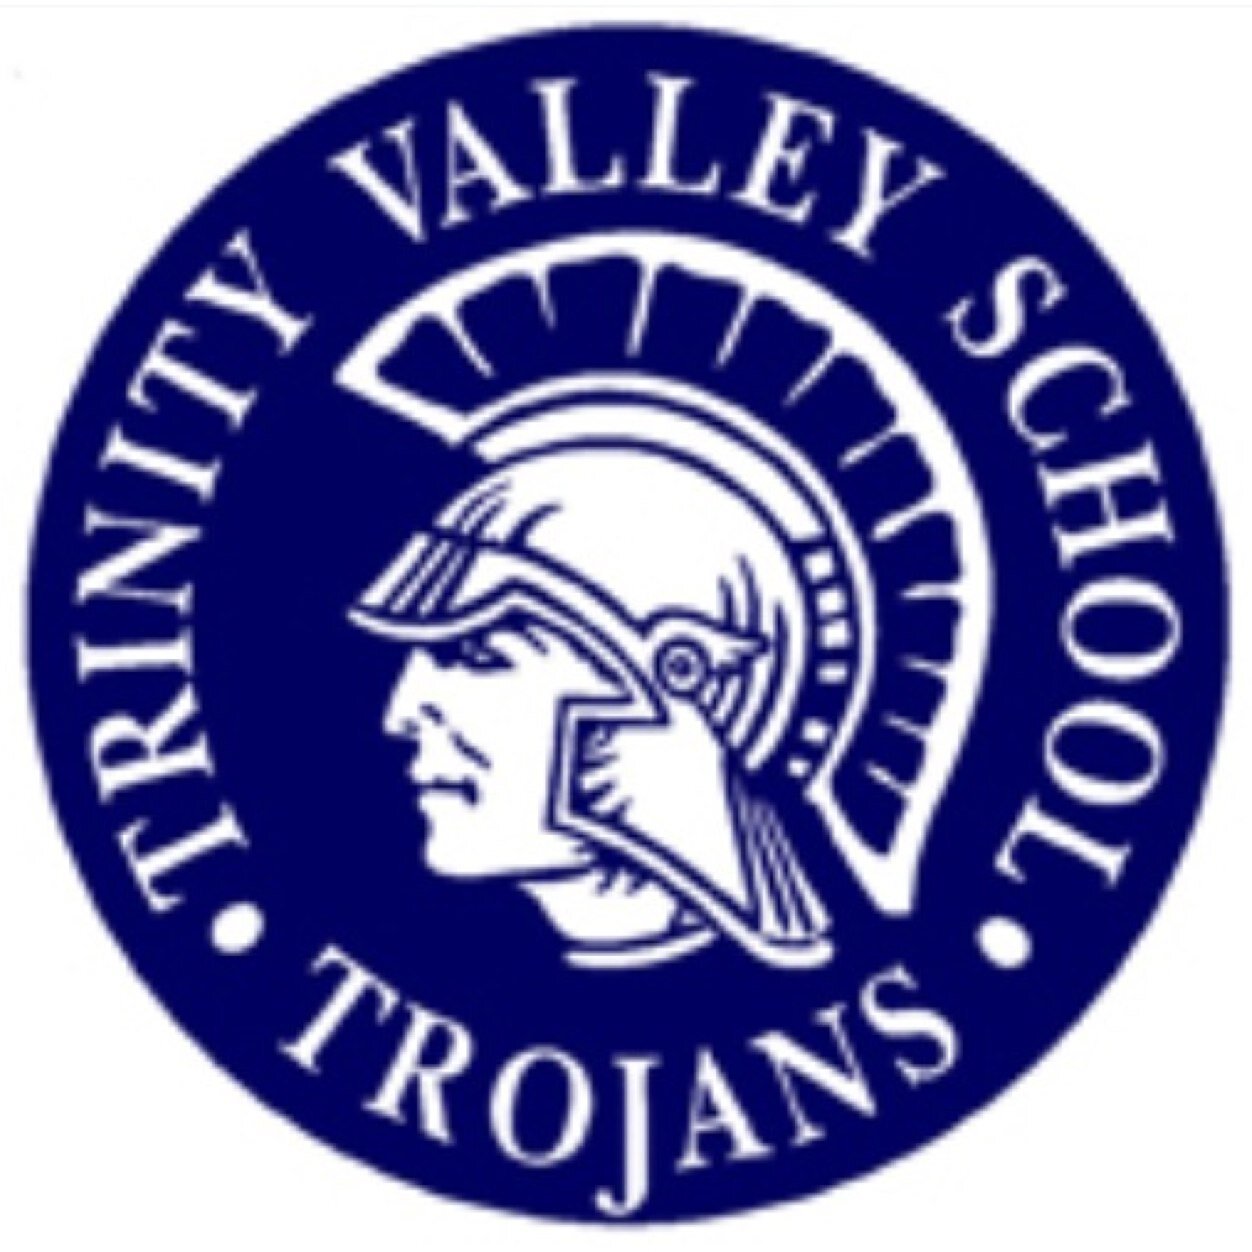 Sports updates and information for the Trinity Valley School Trojans. 
Fort Worth, Texas